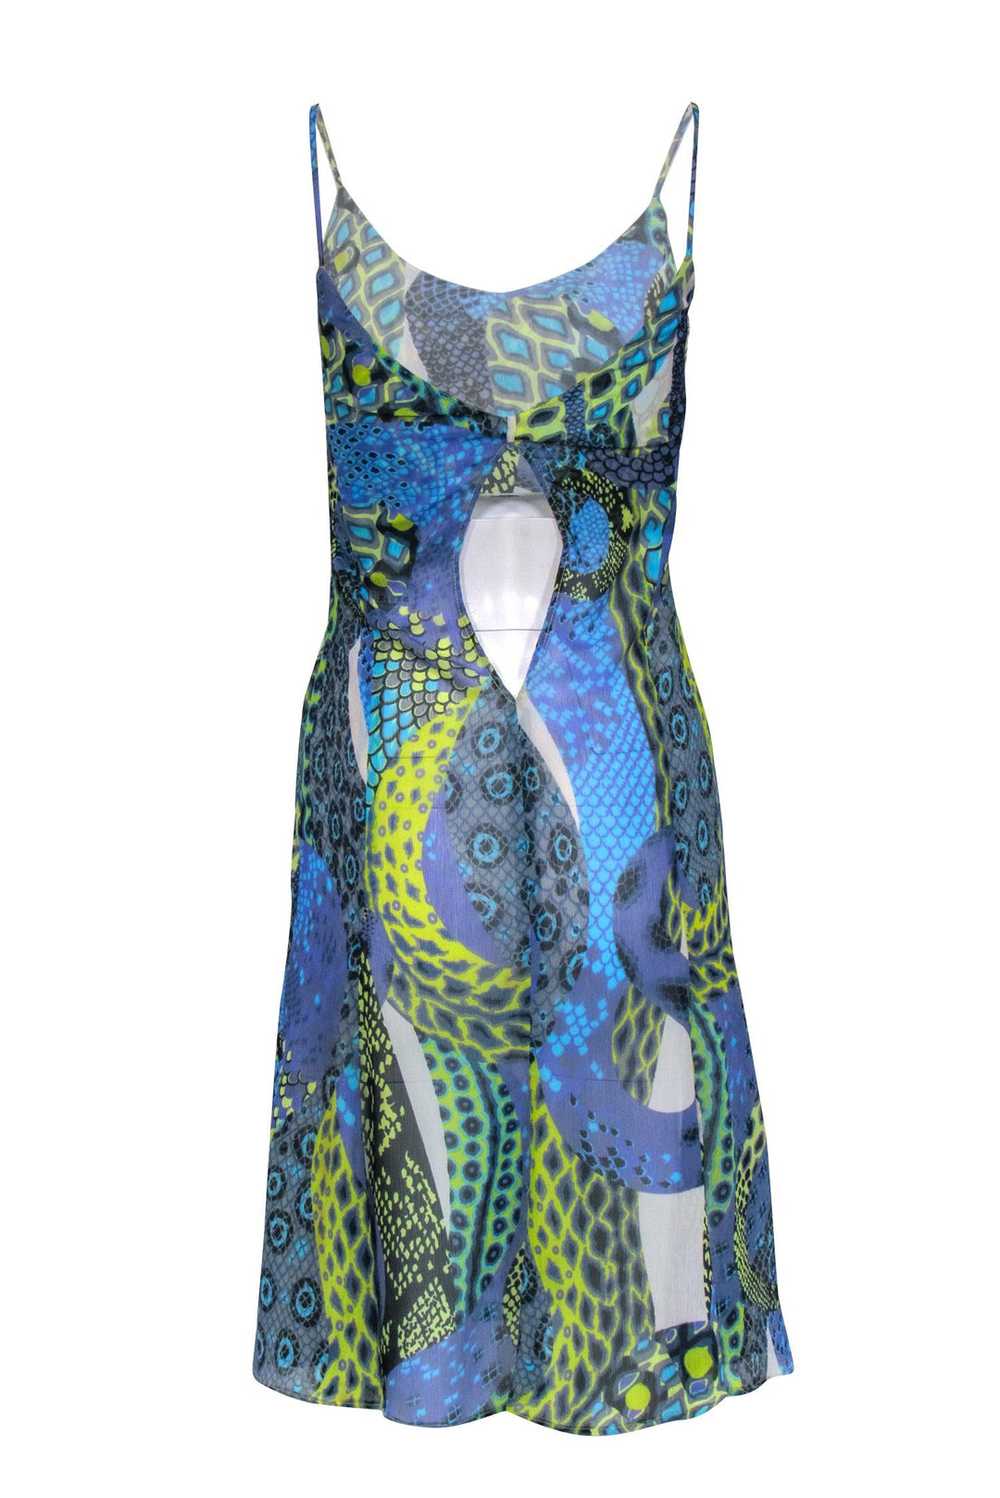 Versace Jeans Couture - Blue & Green Python Print… - image 3